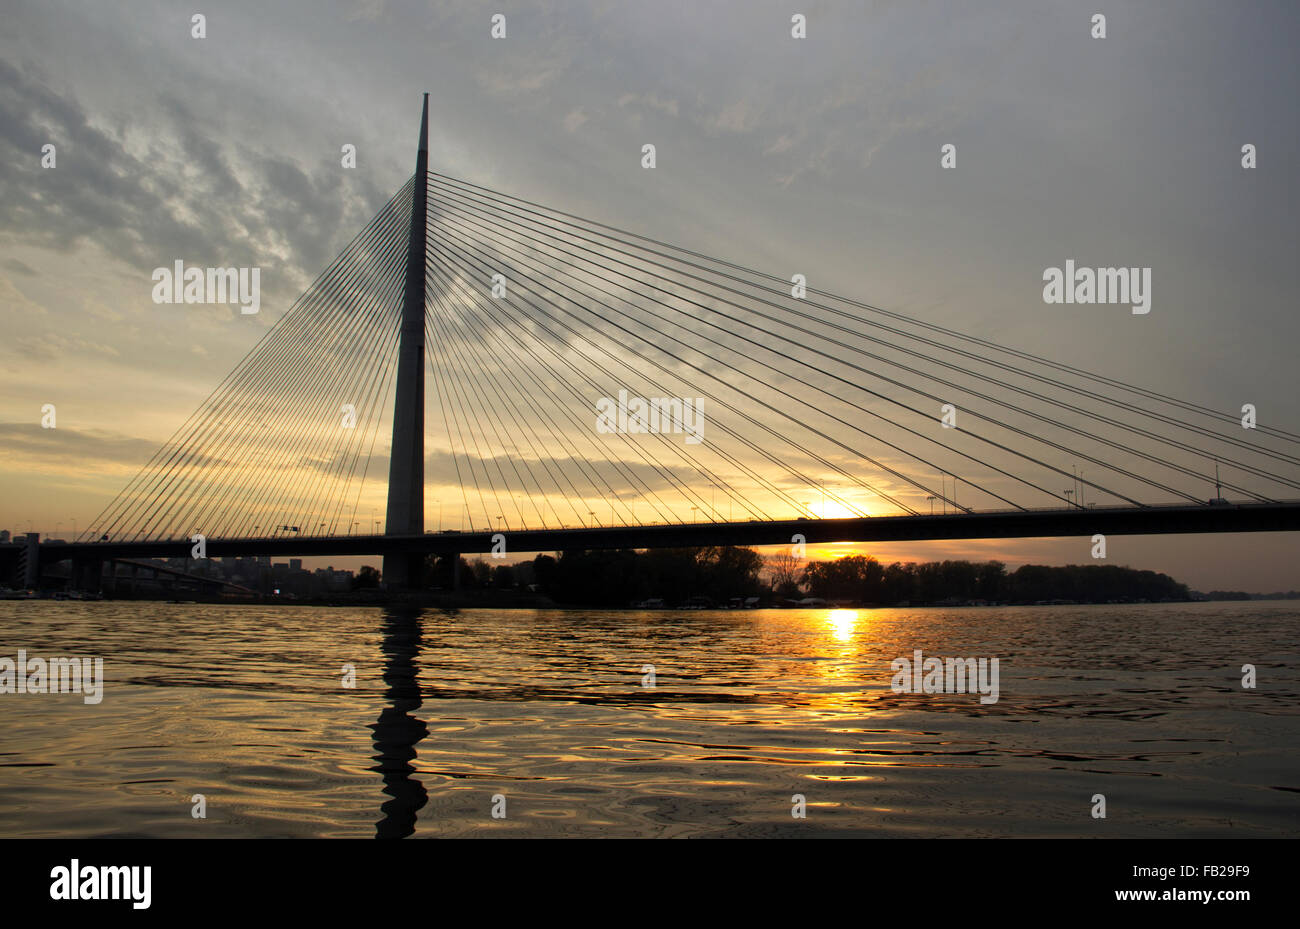 Belgrade, Serbia - Cable bridge over the Sava river at late afternoon Stock Photo